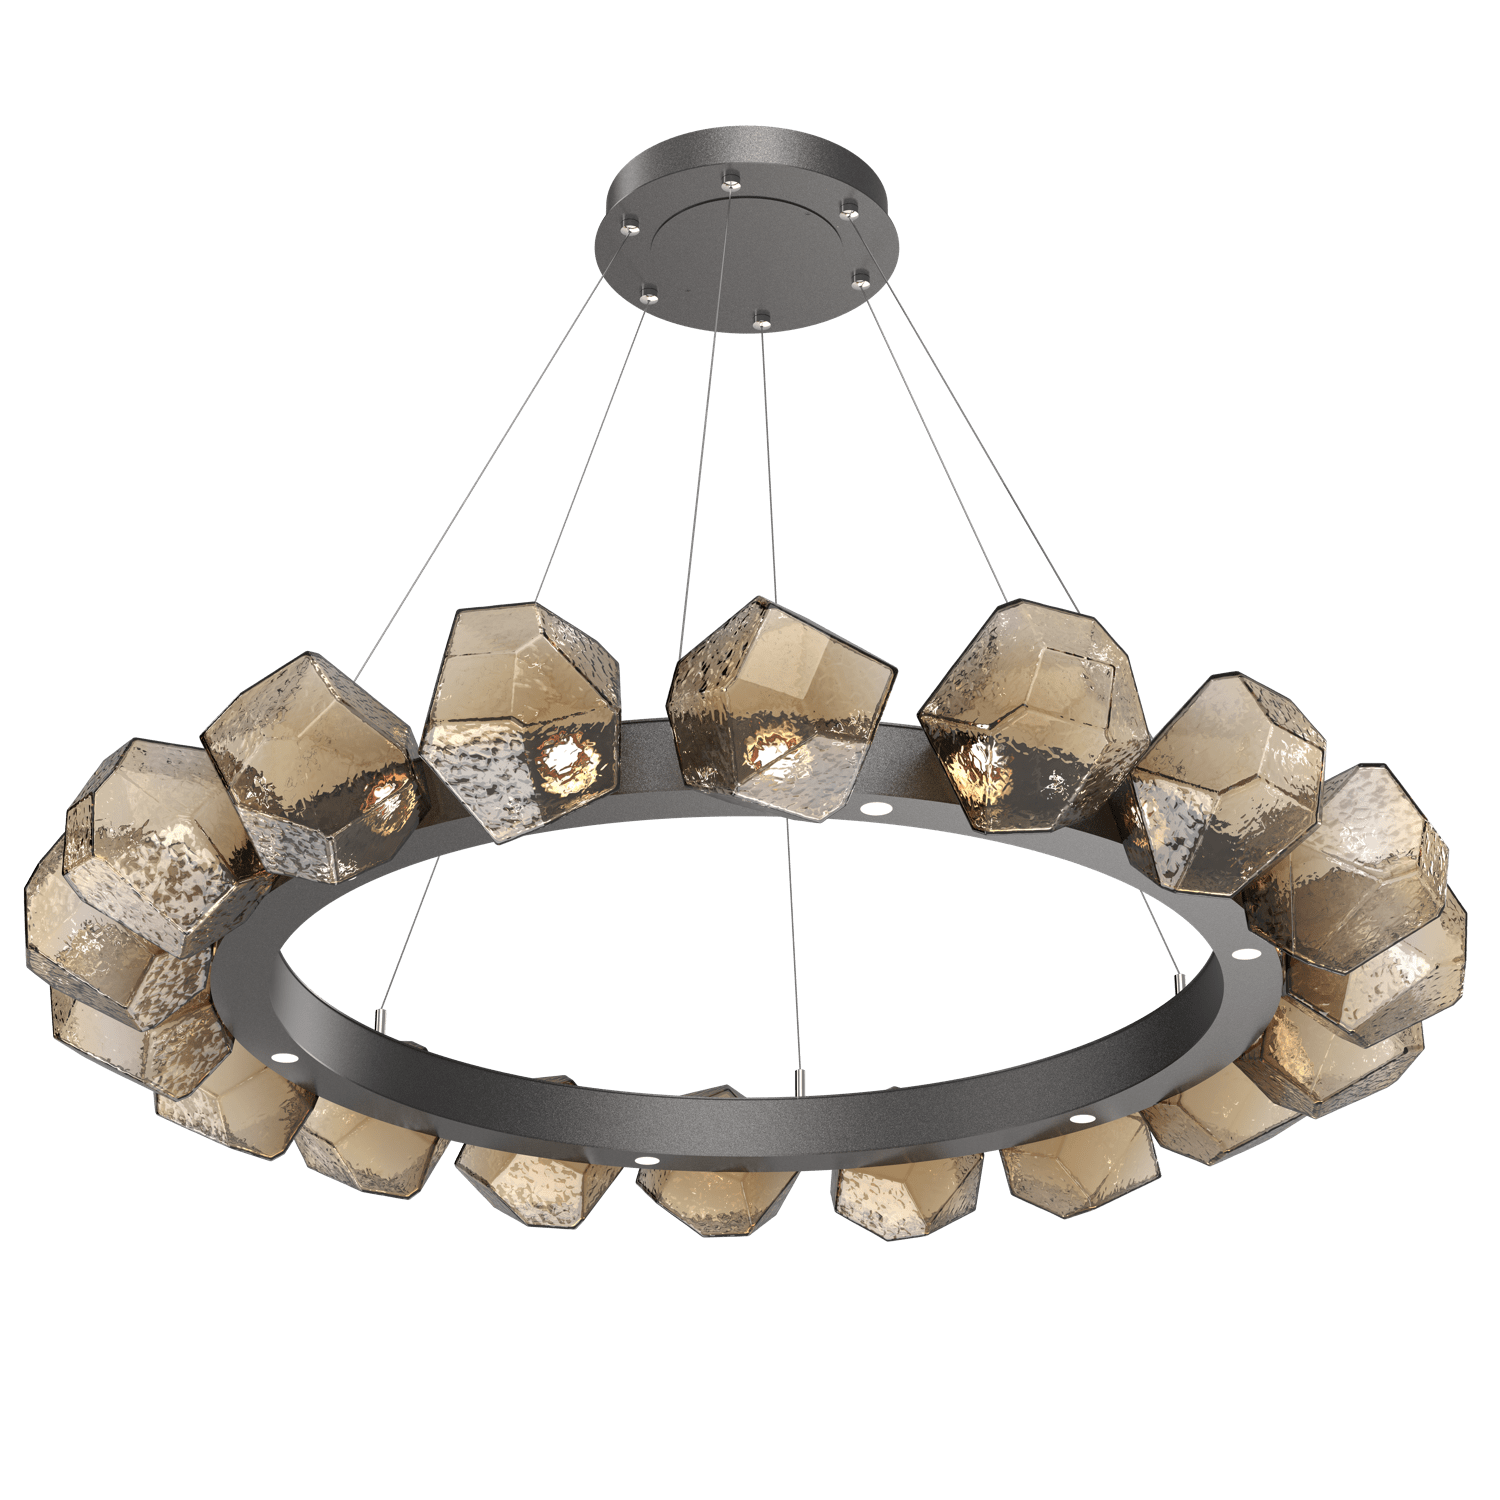 CHB0039-48-GP-B-Hammerton-Studio-Gem-48-inch-radial-ring-chandelier-with-graphite-finish-and-bronze-blown-glass-shades-and-LED-lamping